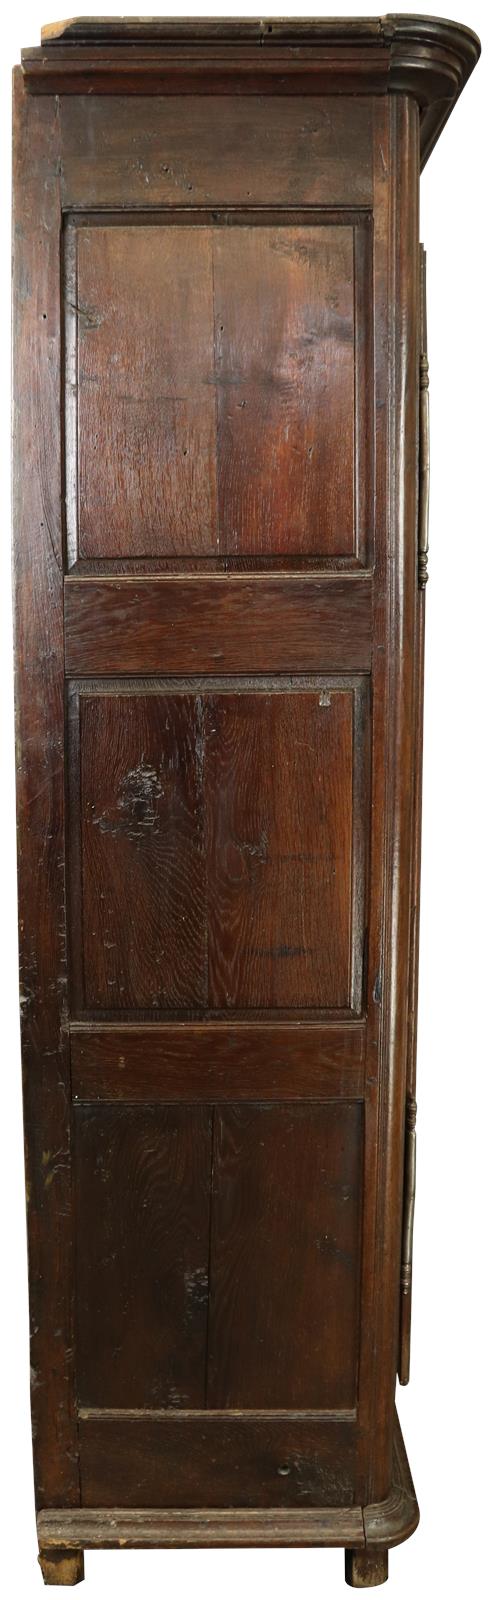 Armoire Antique French Provincial Very Old 1790 Oak Wood Peg Construction Heart -Image 10